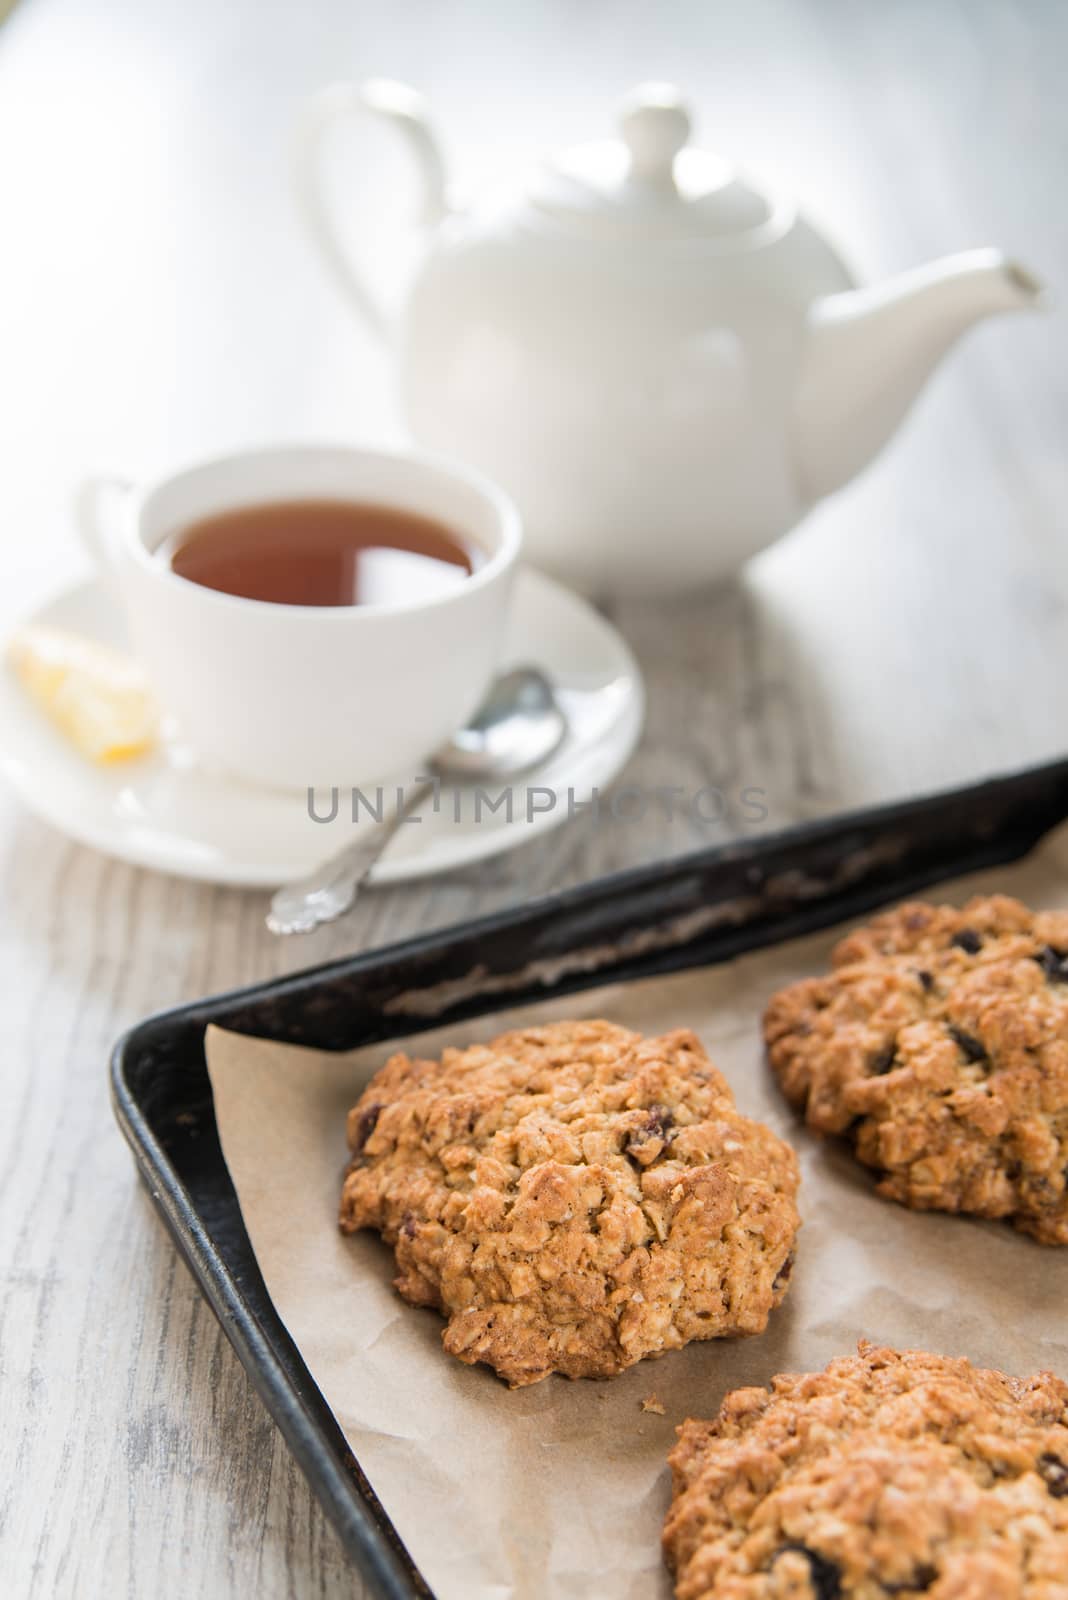 Tea with the oatmeal cookies by Linaga